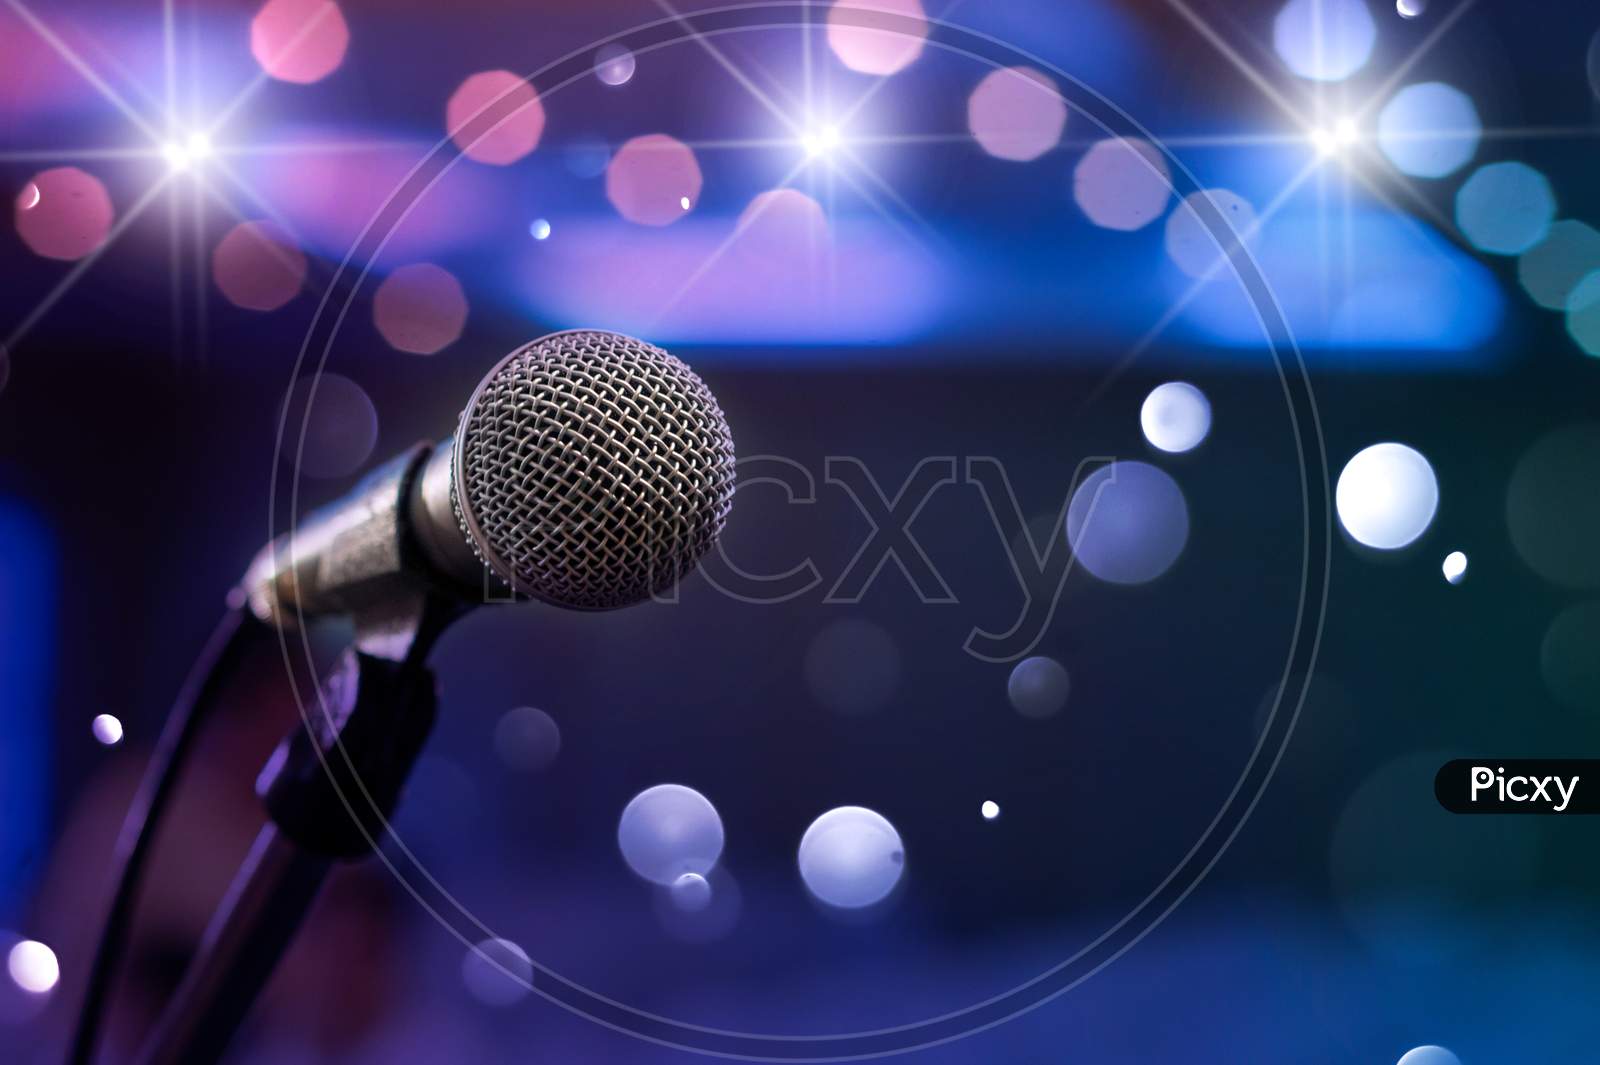 Communication Microphone On Stage Against A Background Of Auditorium Concert Stage